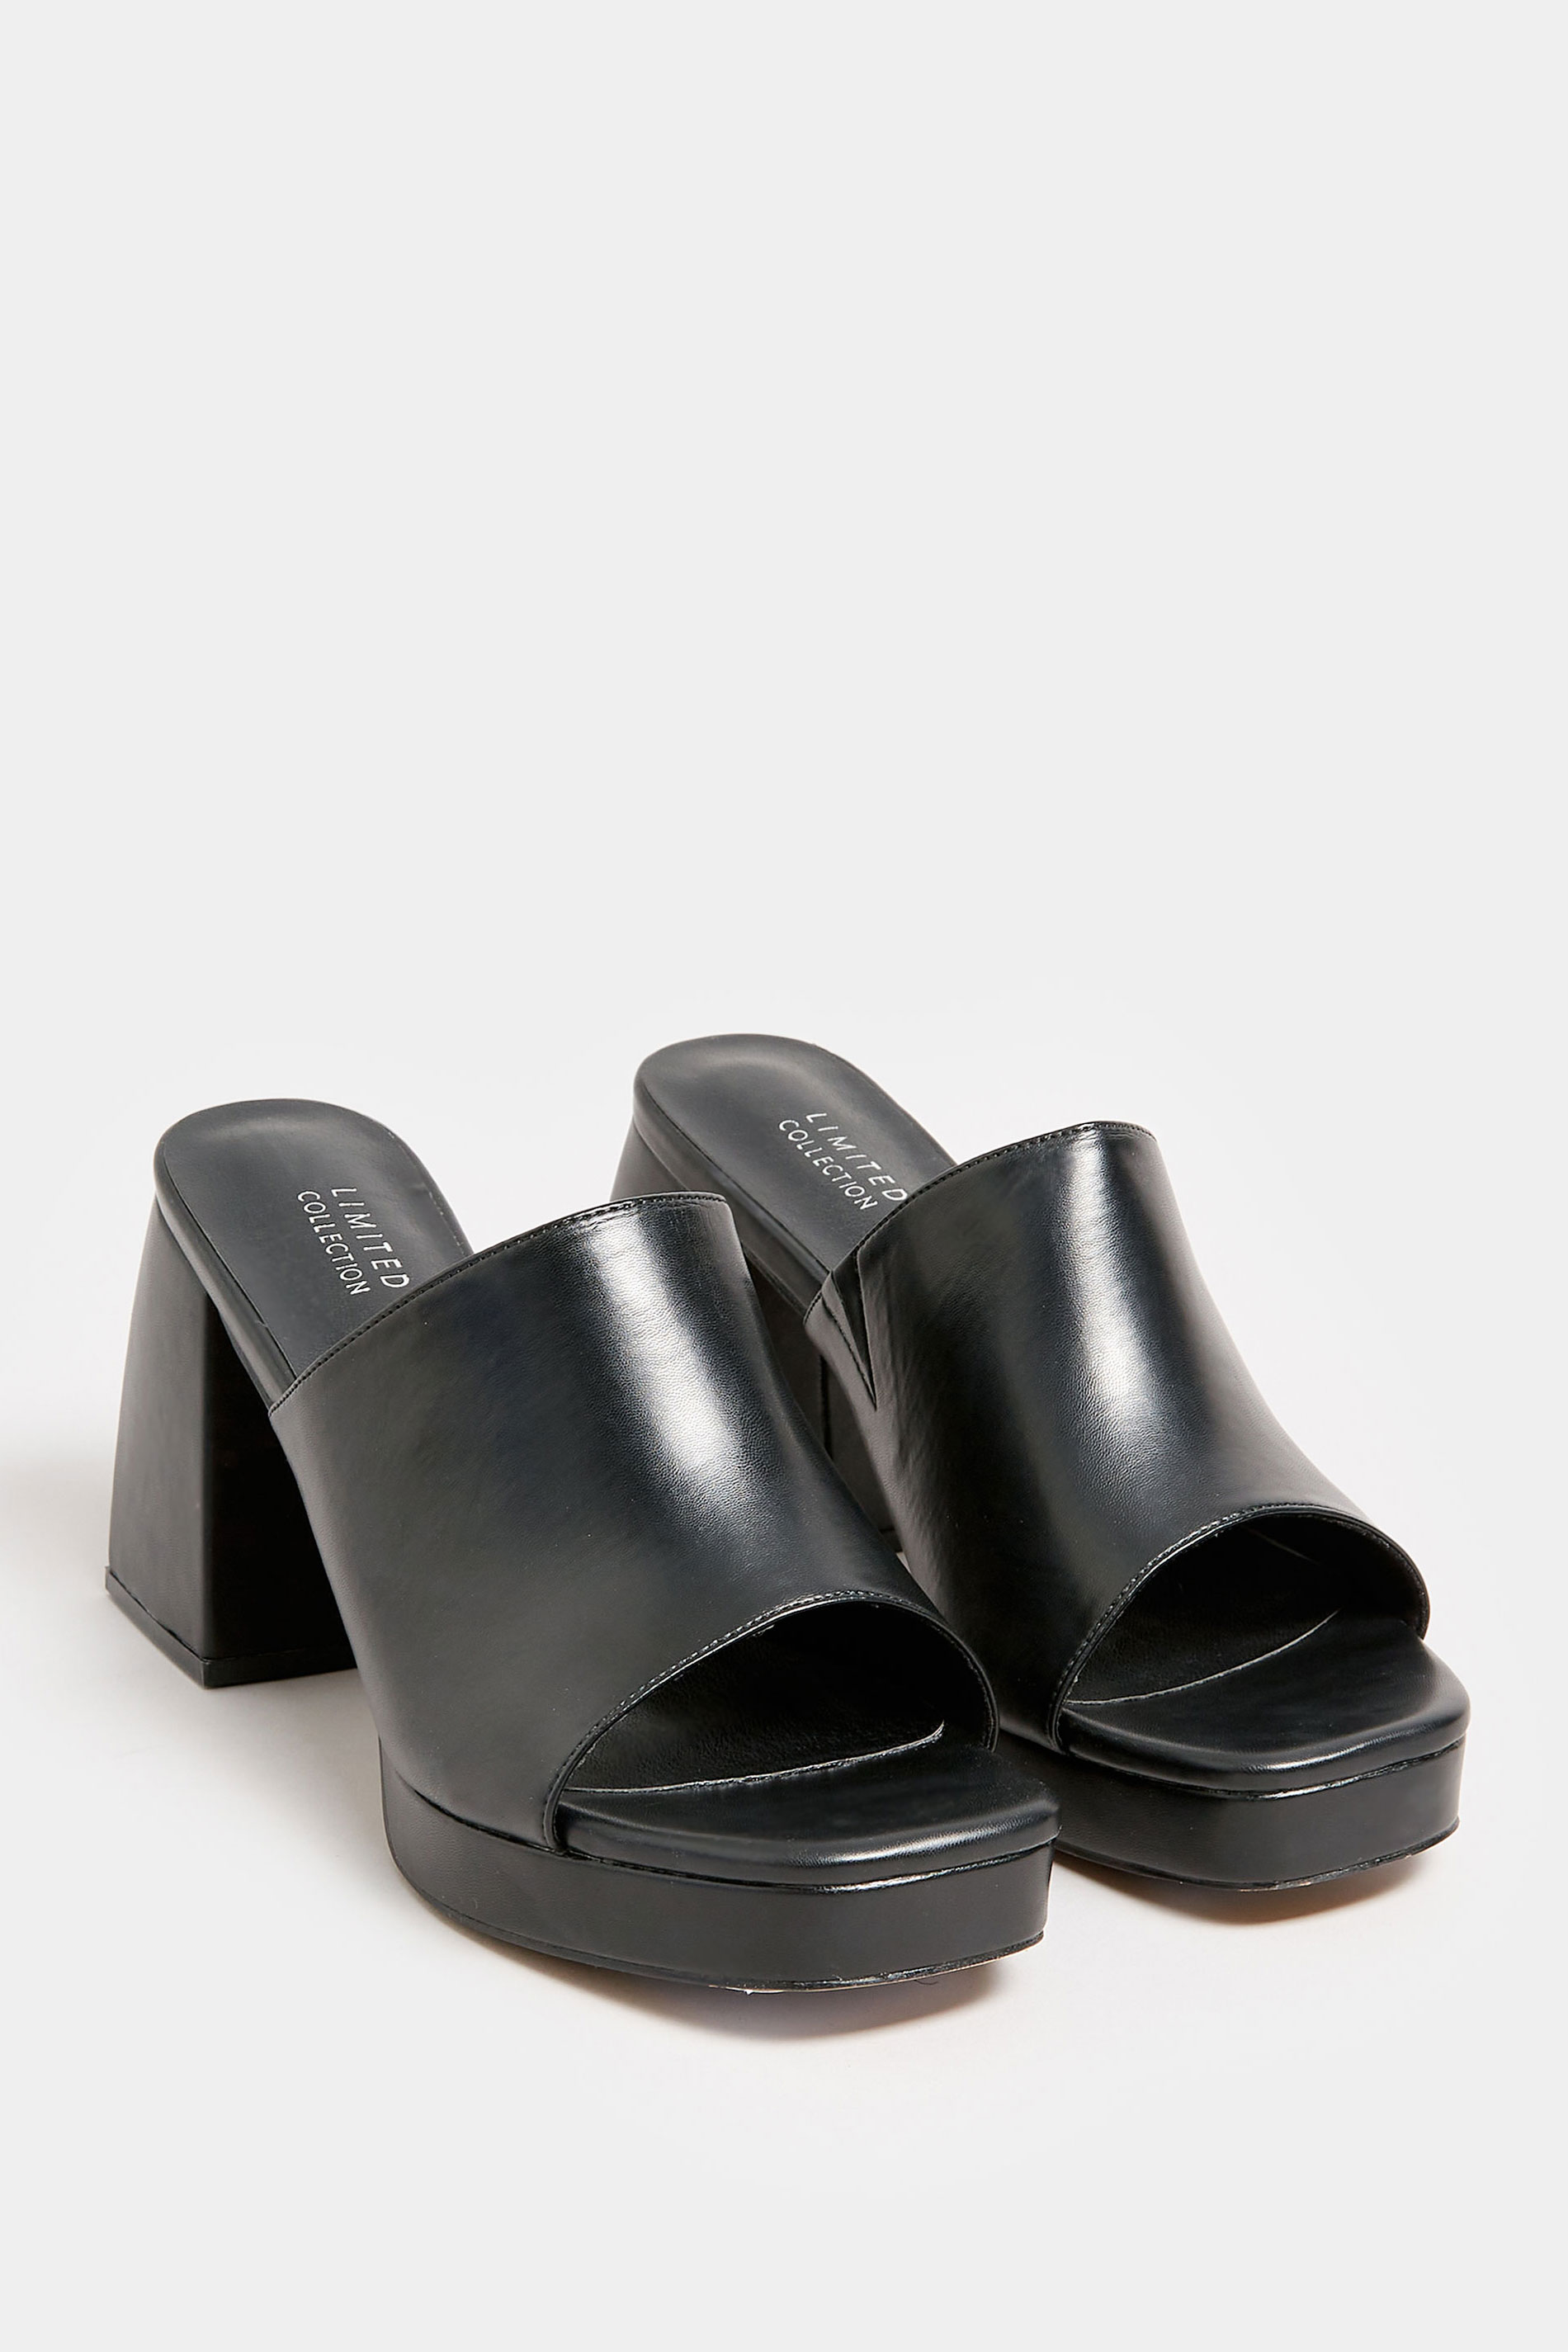 LIMITED COLLECTION Plus Size Black Platform Block Mule Sandal Heels In Wide E Fit | Yours Clothing  2